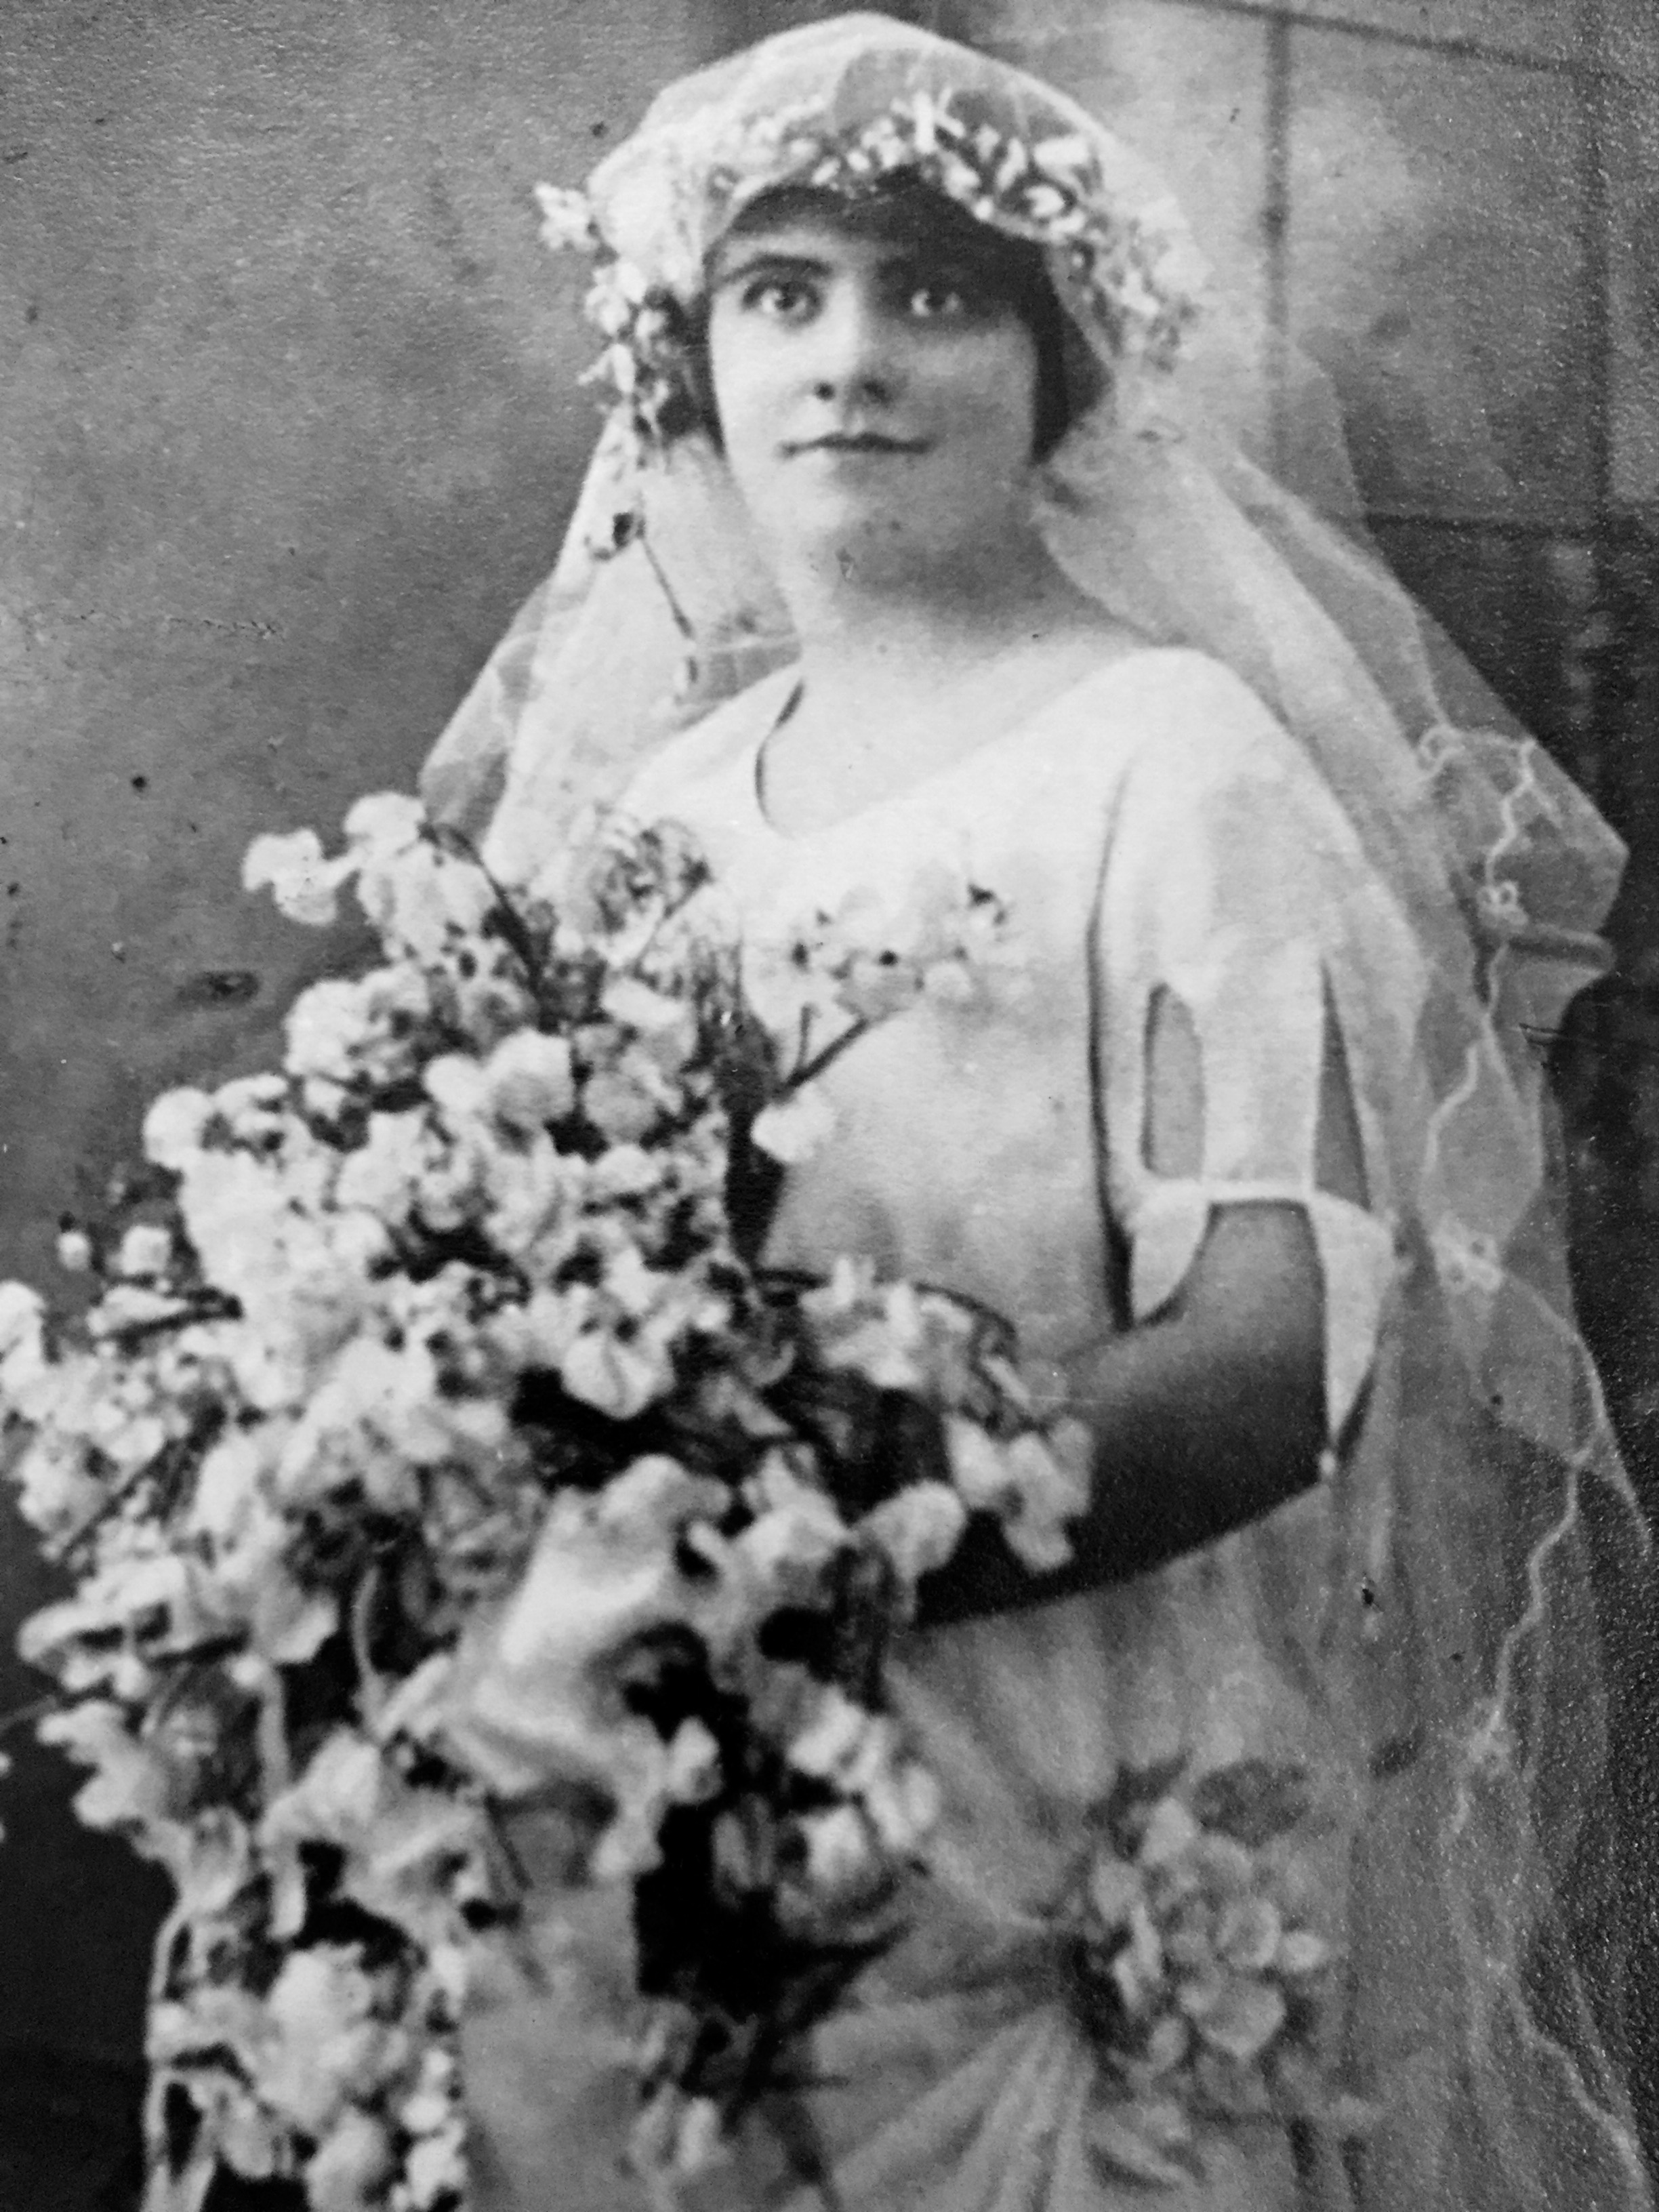 Roslyn's Grandmother Florence Thompson (née Robertson) on her wedding day. Approx 1923?